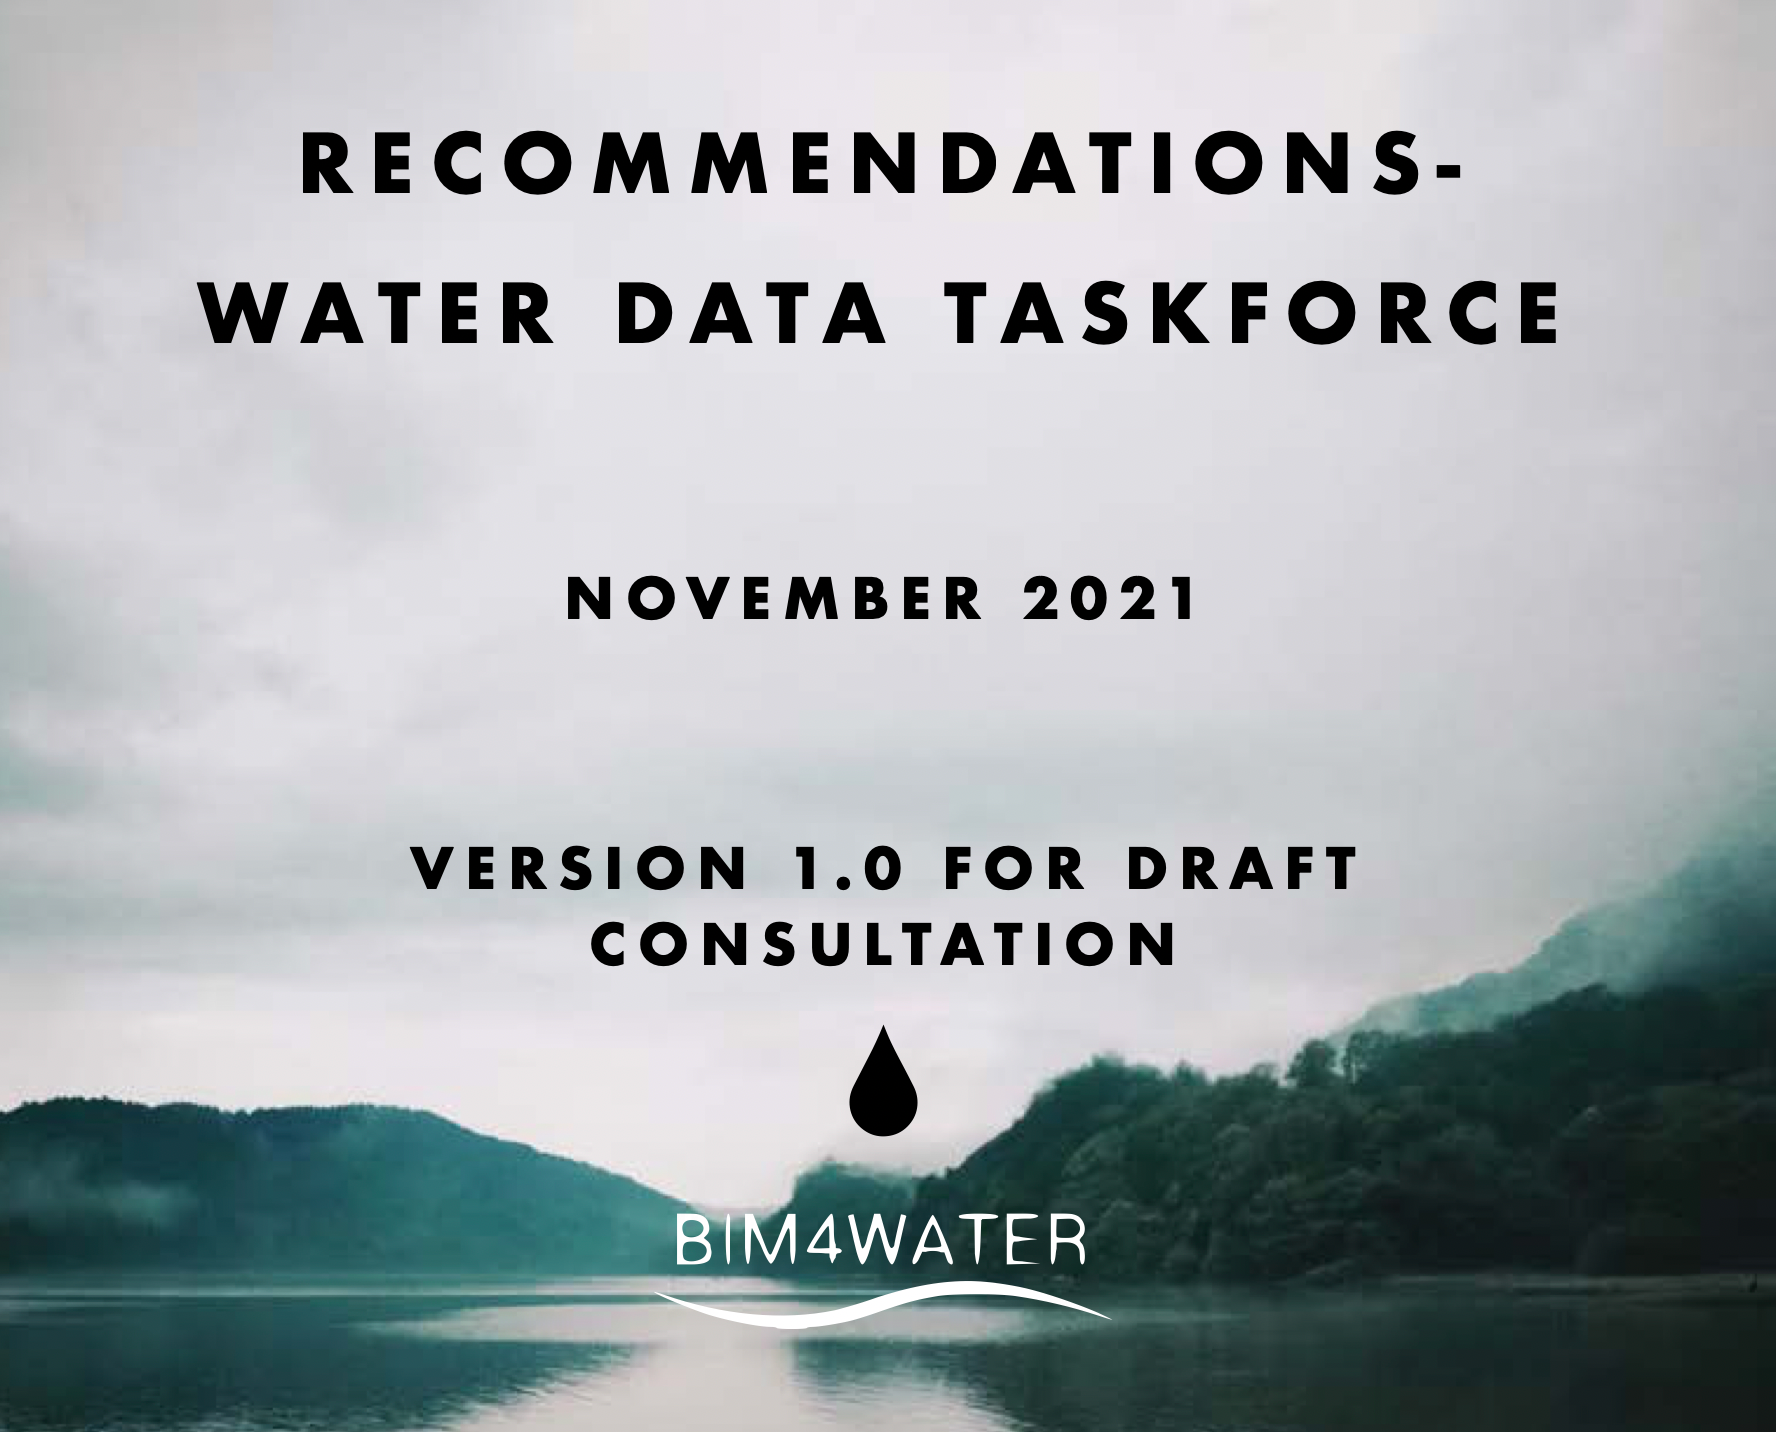 The bim4water data taskforce releases key recommendations for public consultation